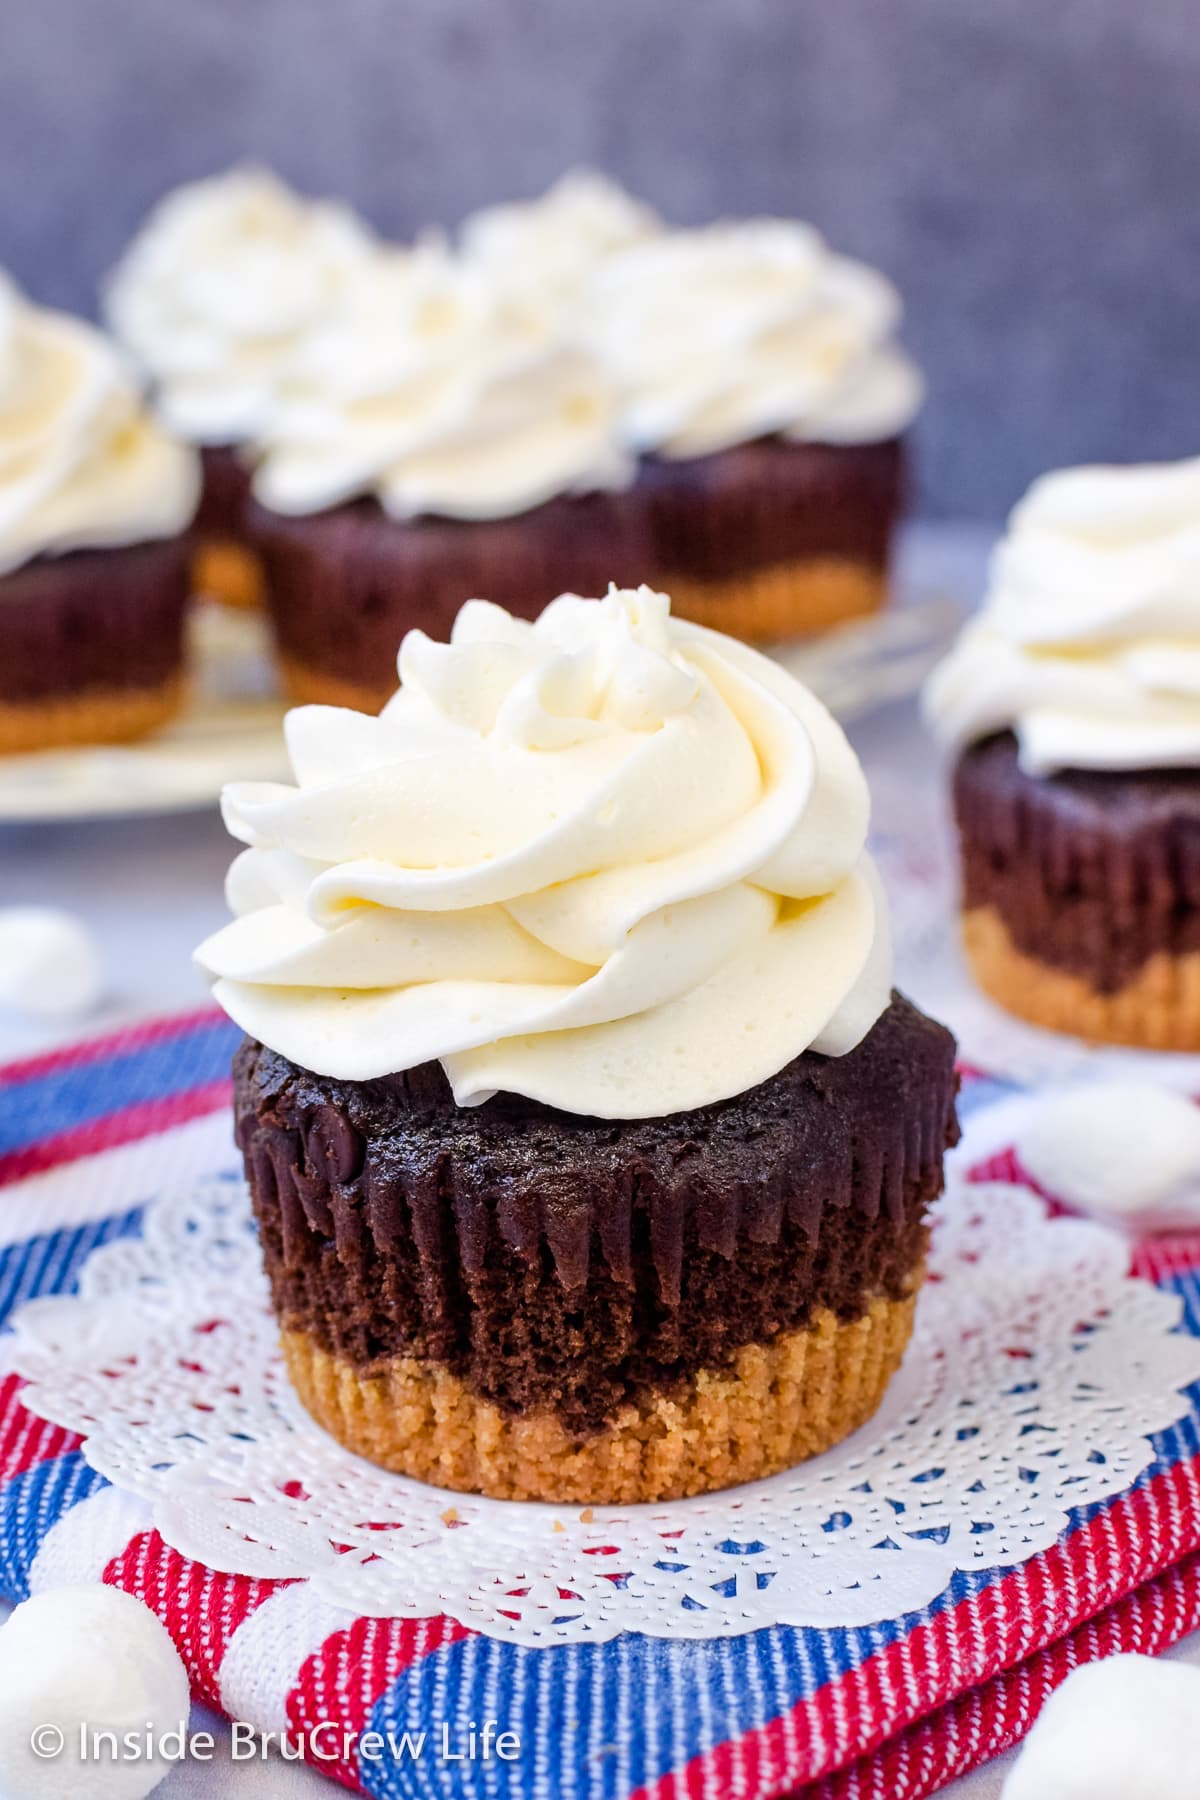 A chocolate s'mores cupcake topped with marshmallow fluff frosting.